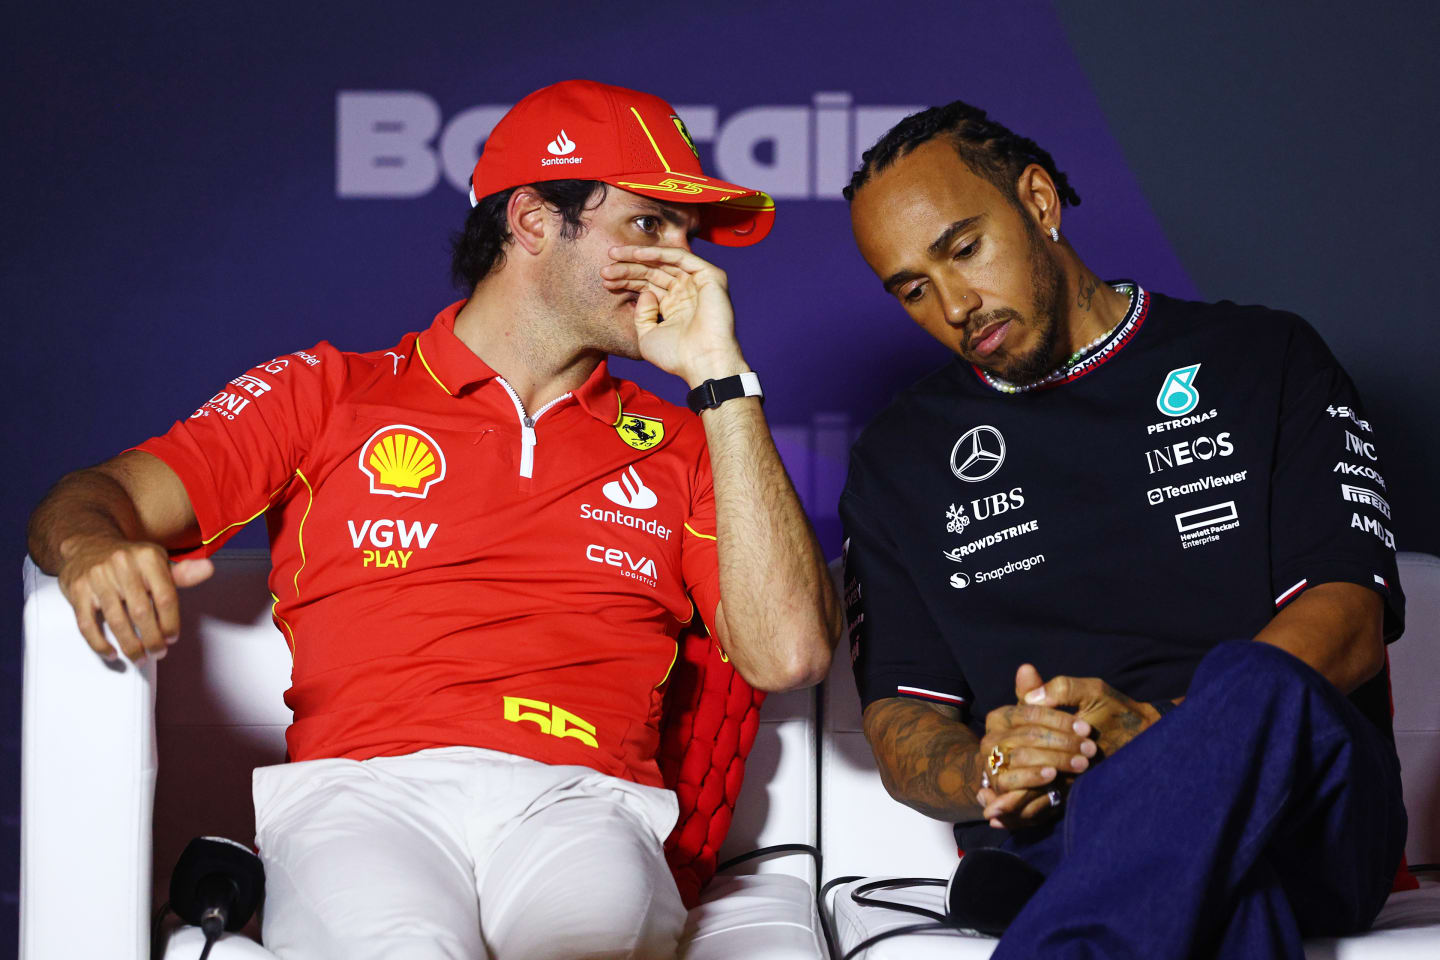 BAHRAIN, BAHRAIN - FEBRUARY 28: Carlos Sainz of Spain and Ferrari and Lewis Hamilton of Great Britain and Mercedes attend the Drivers Press Conference during previews ahead of the F1 Grand Prix of Bahrain at Bahrain International Circuit on February 28, 2024 in Bahrain, Bahrain. (Photo by Clive Rose/Getty Images)